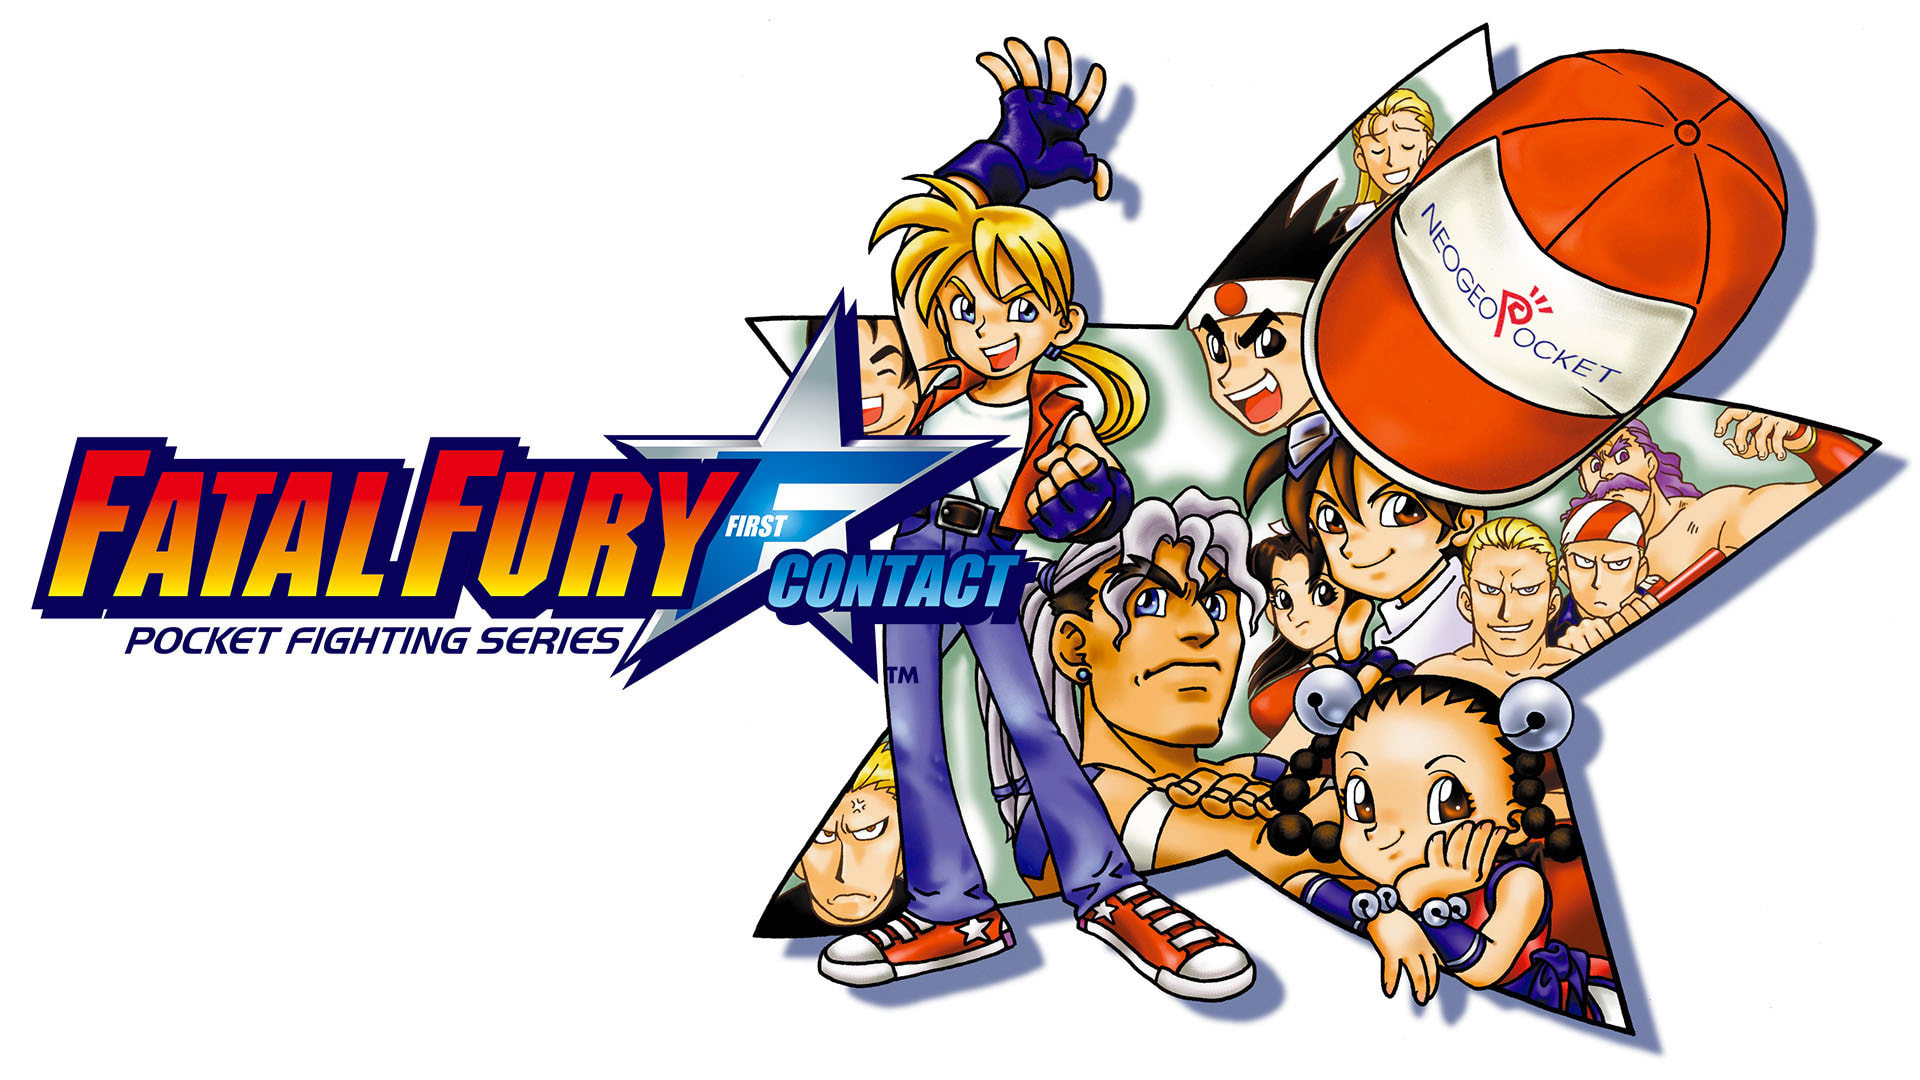 FATAL FURY FIRST CONTACT 1